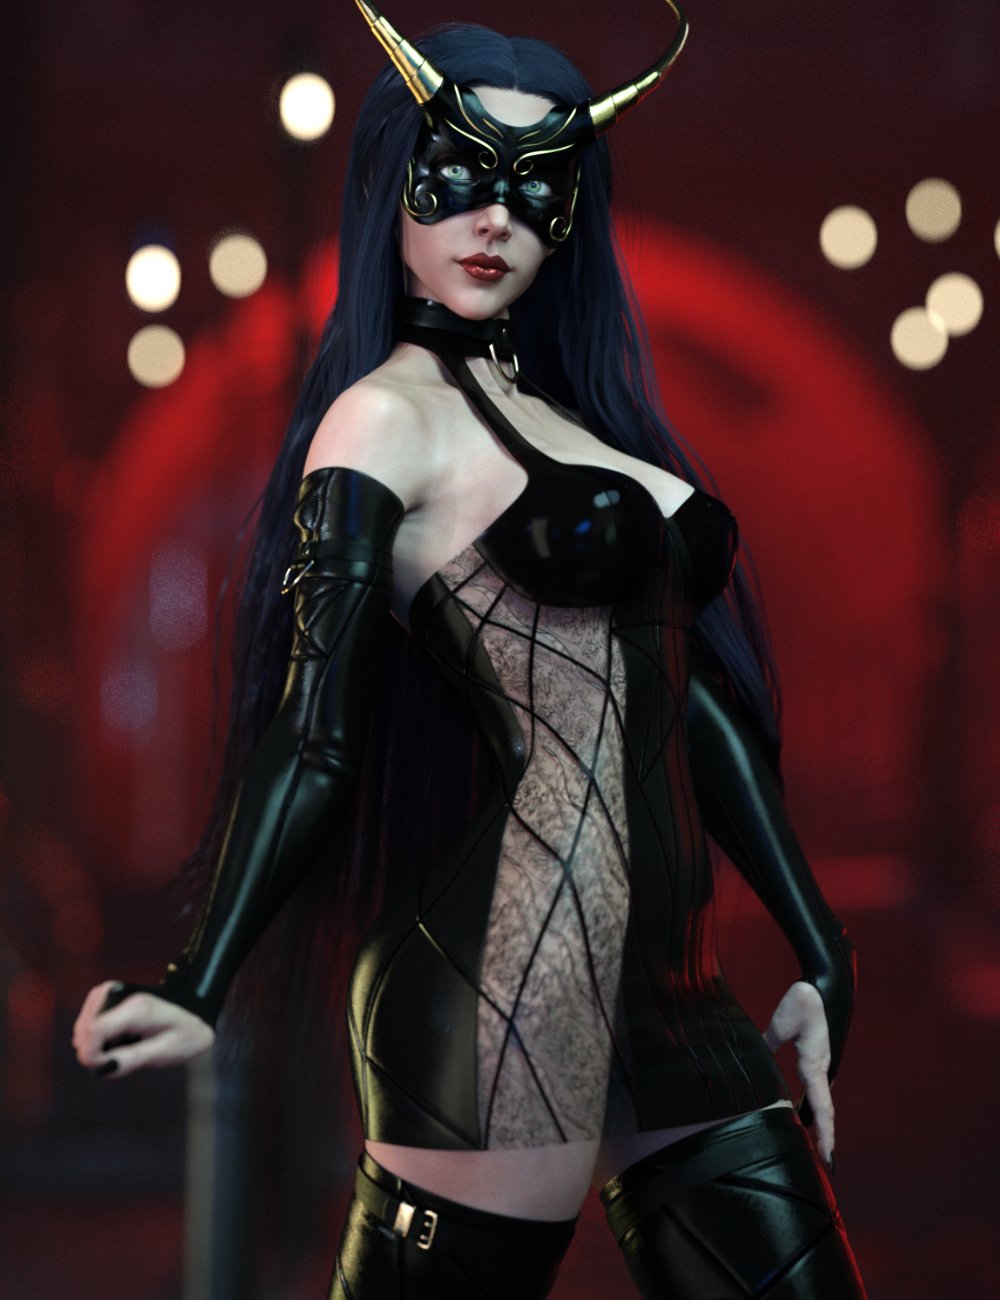 dForce Night Masquerade Outfit for Genesis 8 and 8.1 Females